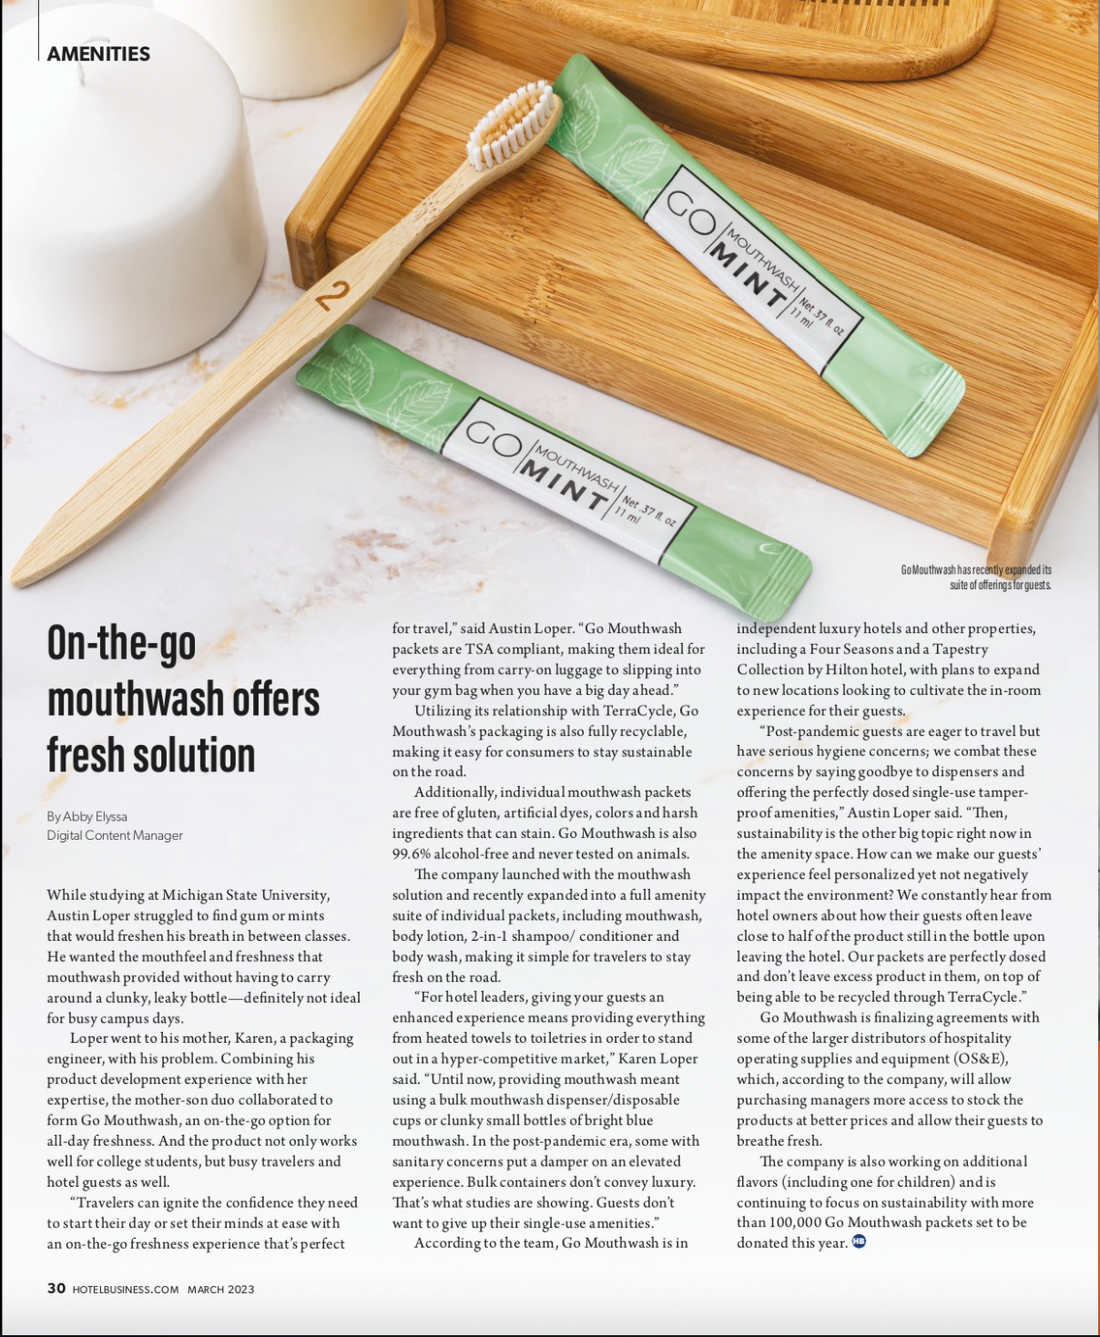 Go Mouthwash featured in Hotel Business Magazine Article